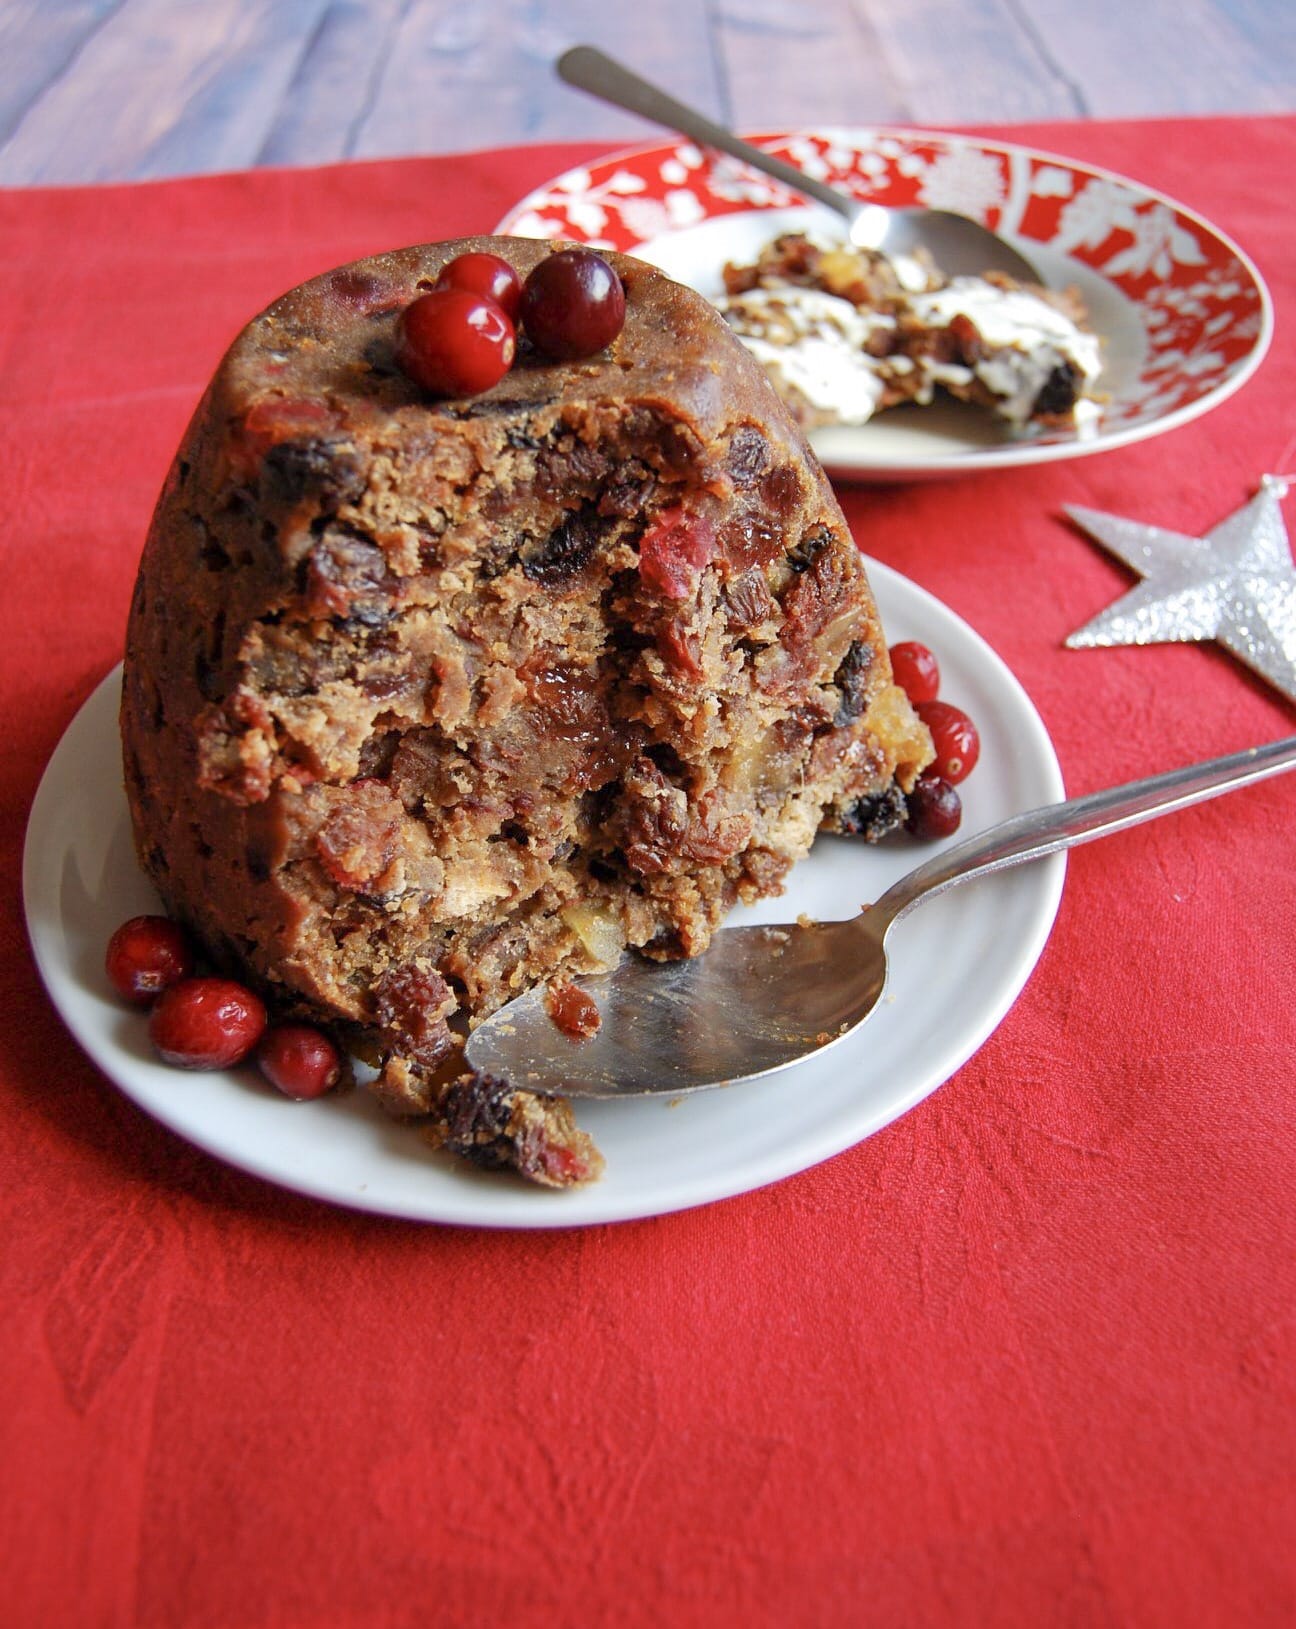 a Christmas pudding topped with fresh cranberries on a white plate with a serving spoon on a red tablecloth.  A red and white bowl with a slice of Christmas pudding and cream with a spoon can be seen in the background.